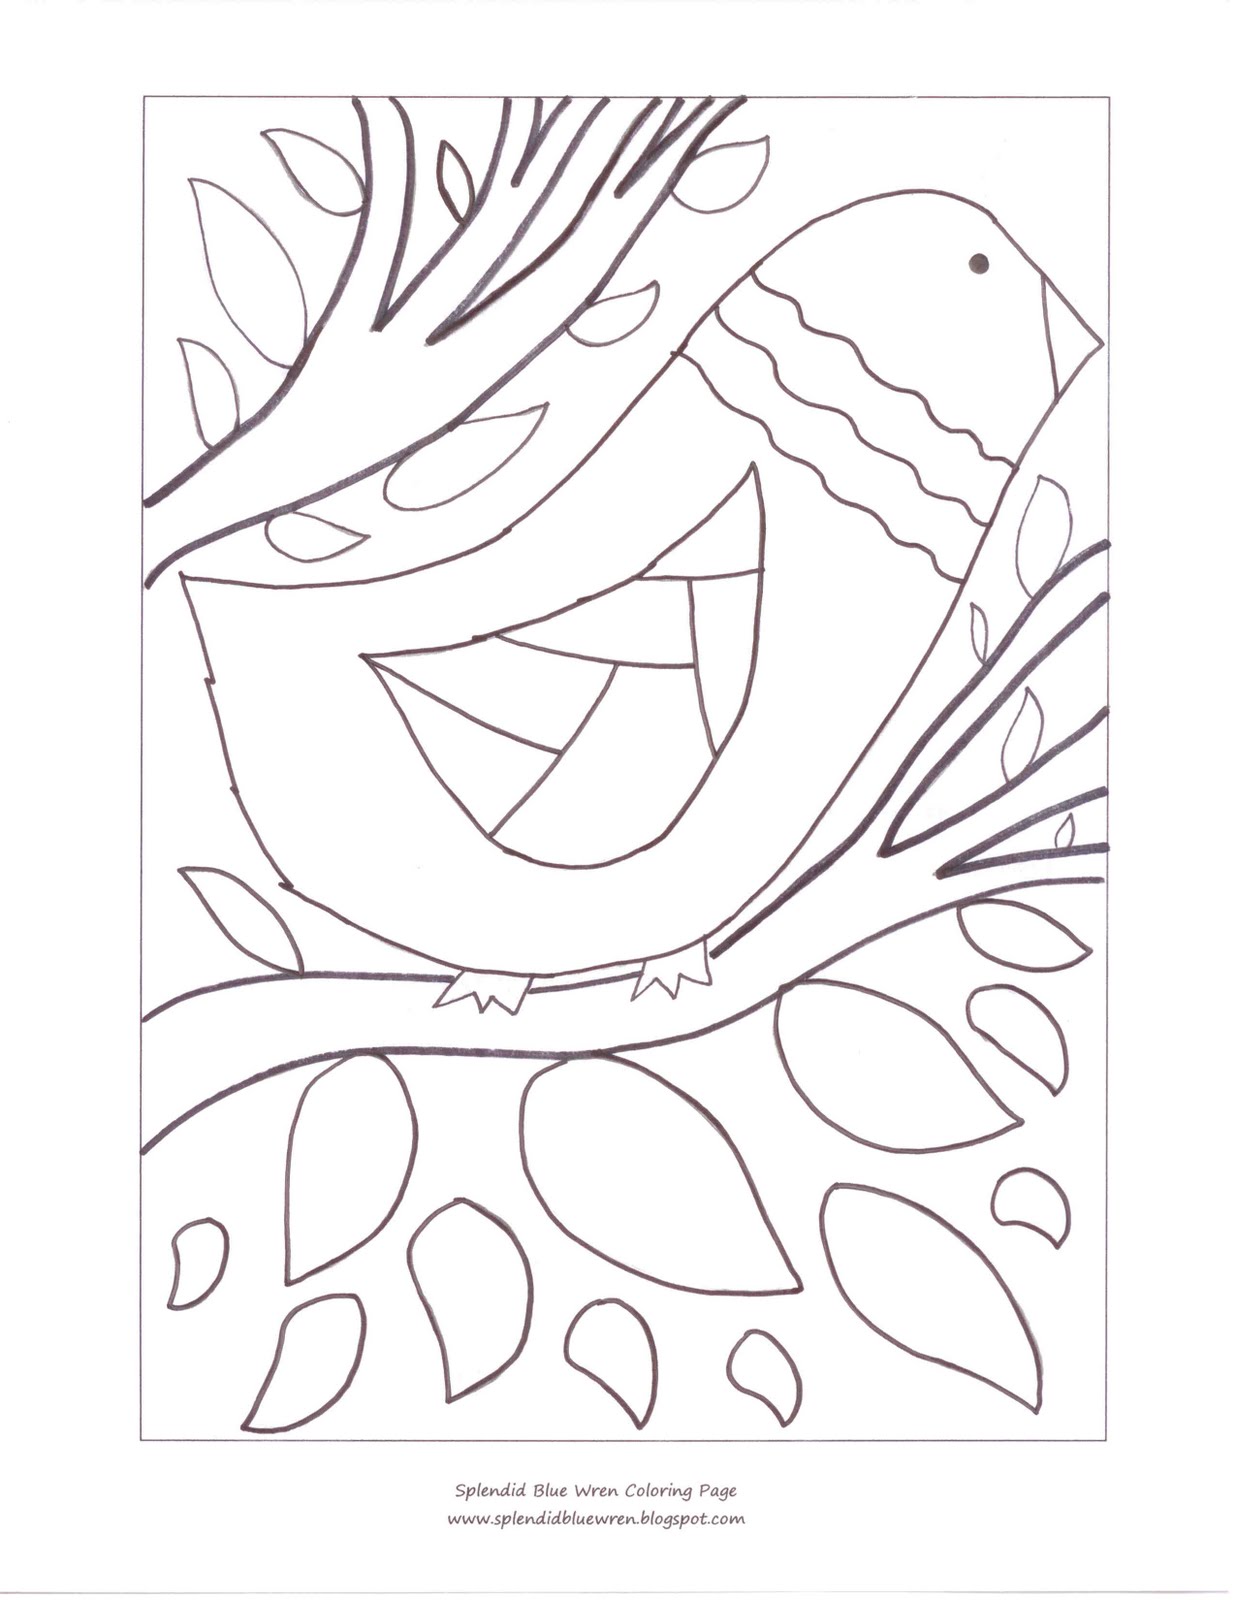 Advent-Wreath-Coloring-Page-|-Coloring-Pages-Gallery